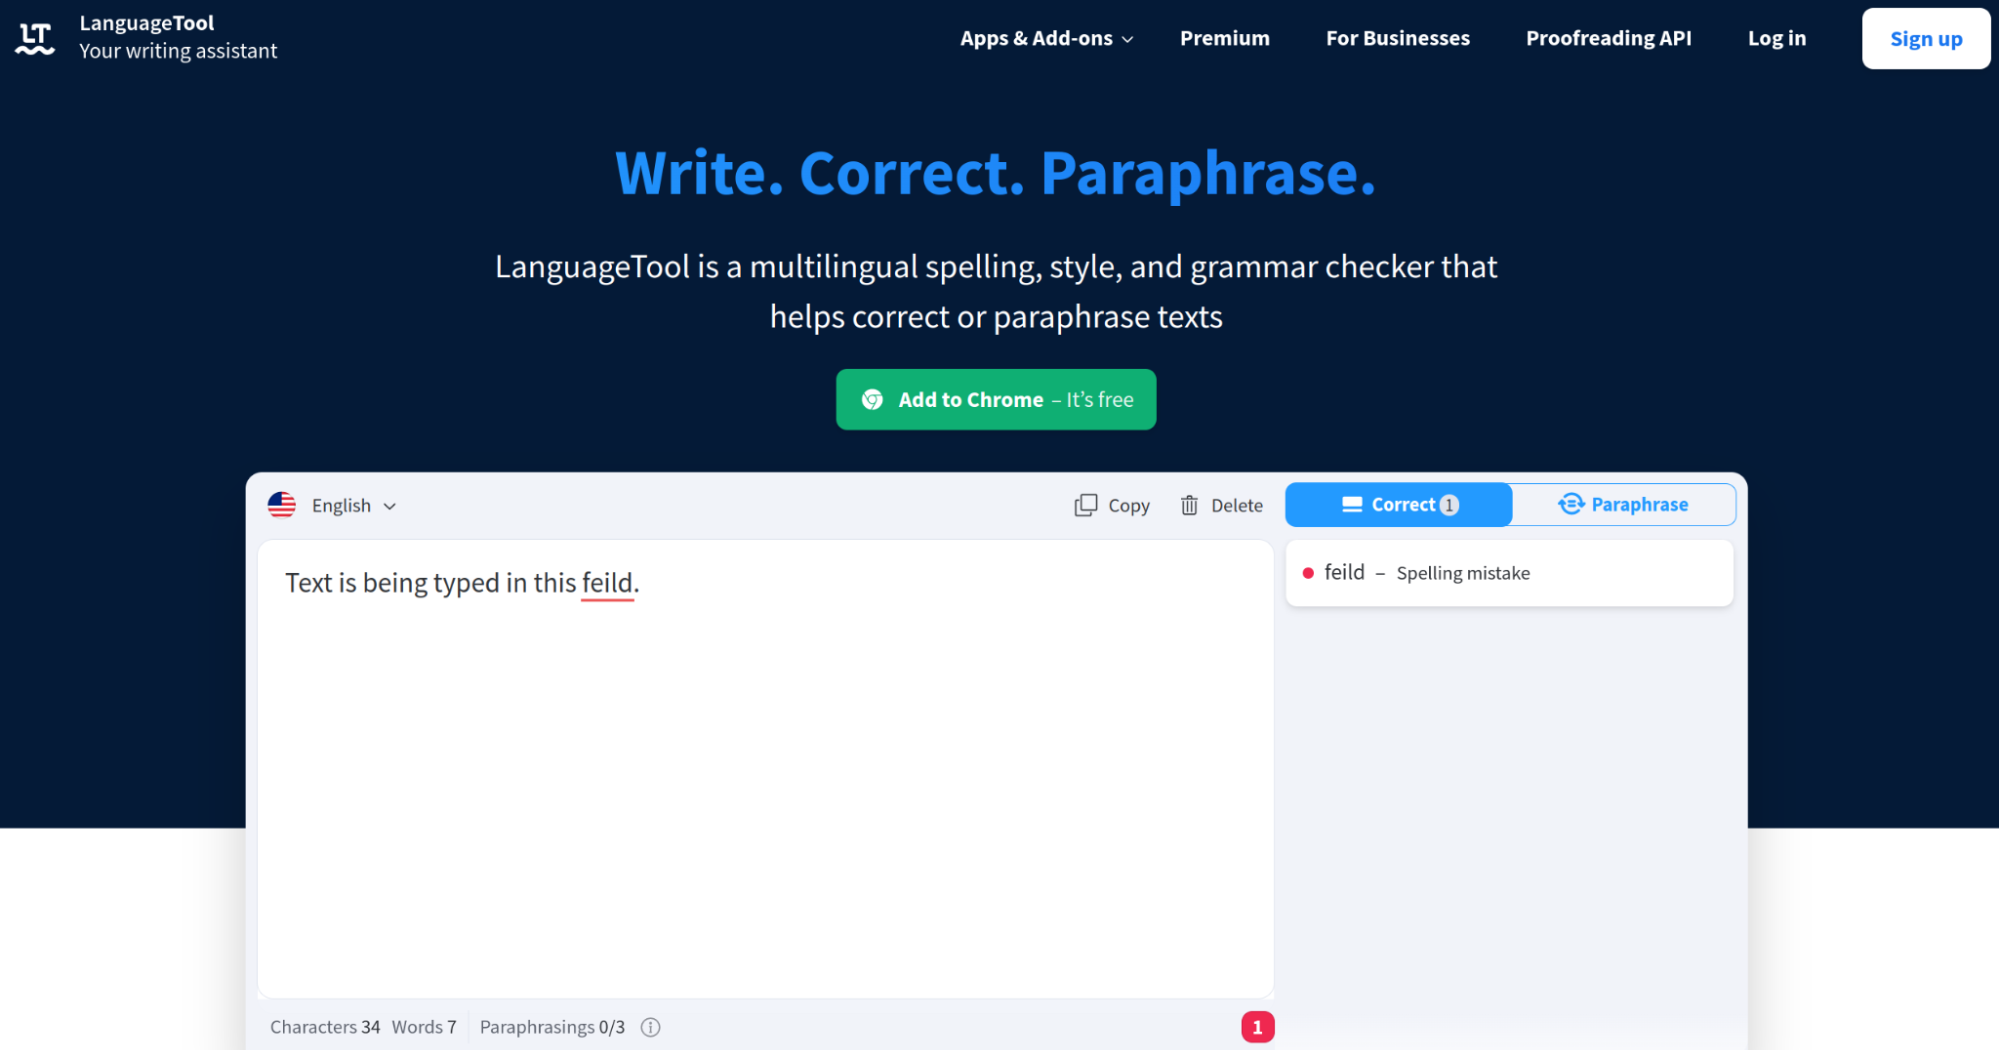 Proofreading tool for checking texts in many languages - LanguageTool